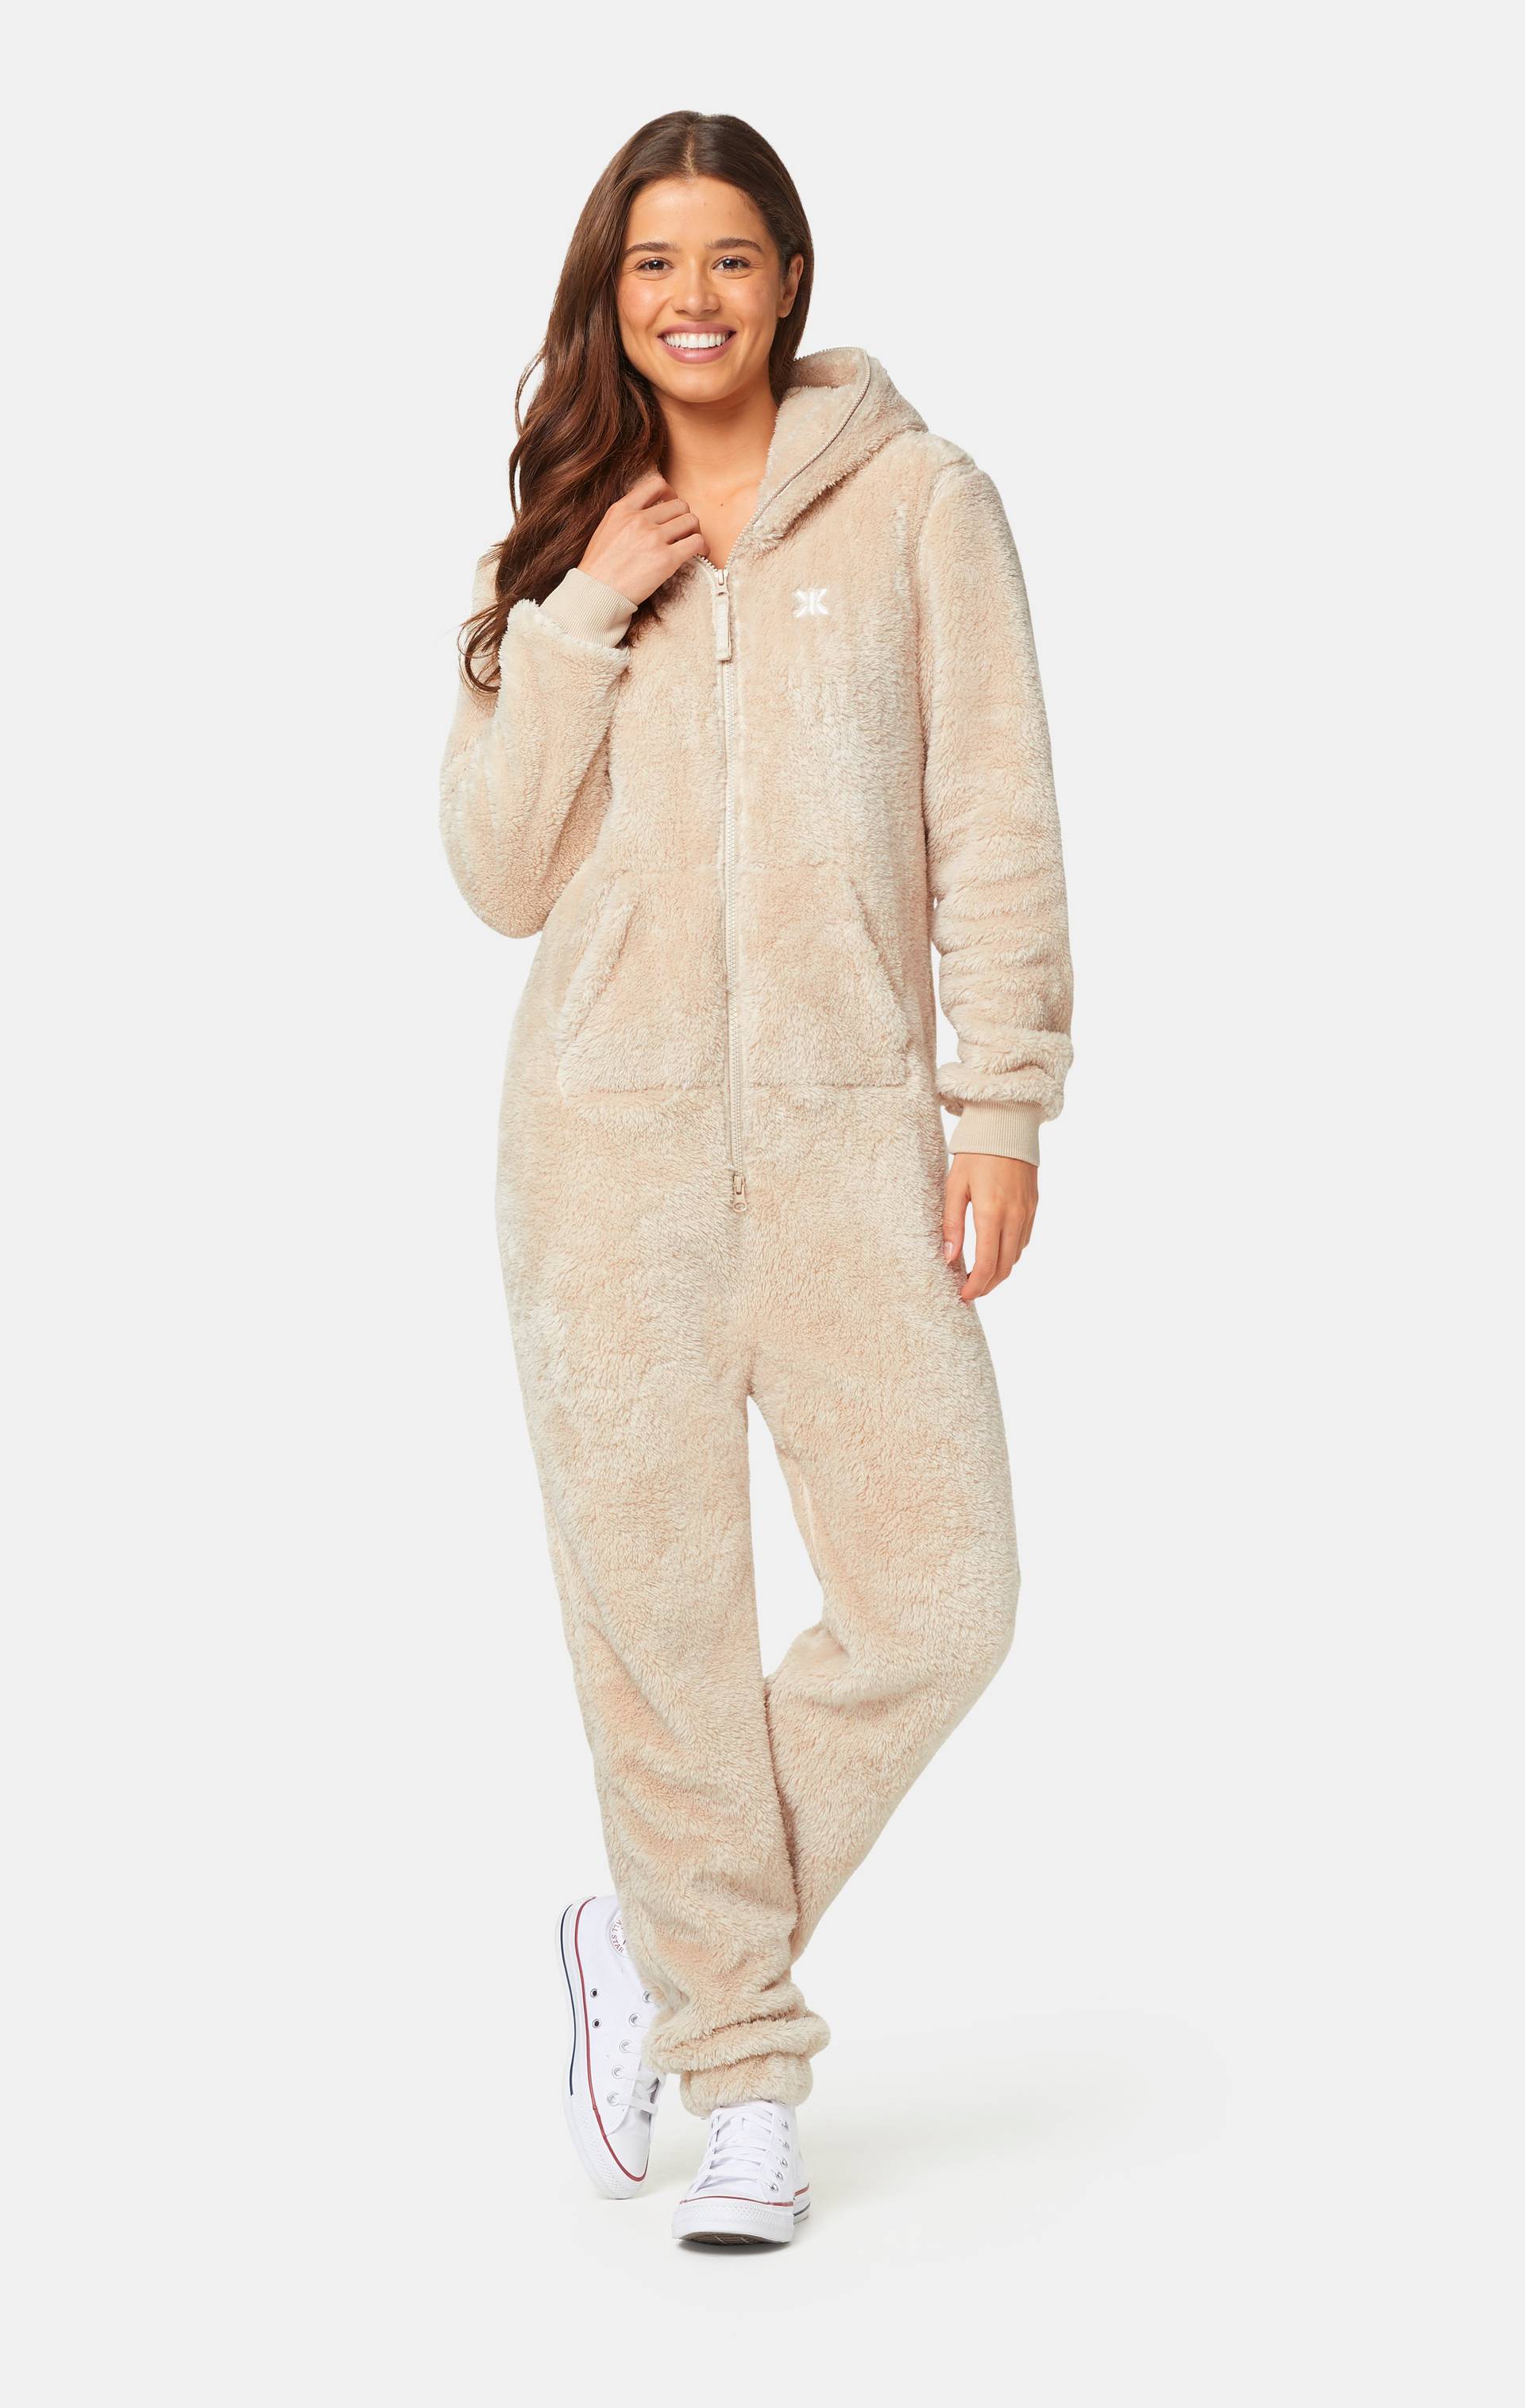 Onepiece The Puppy Jumpsuit Light Brown - 5